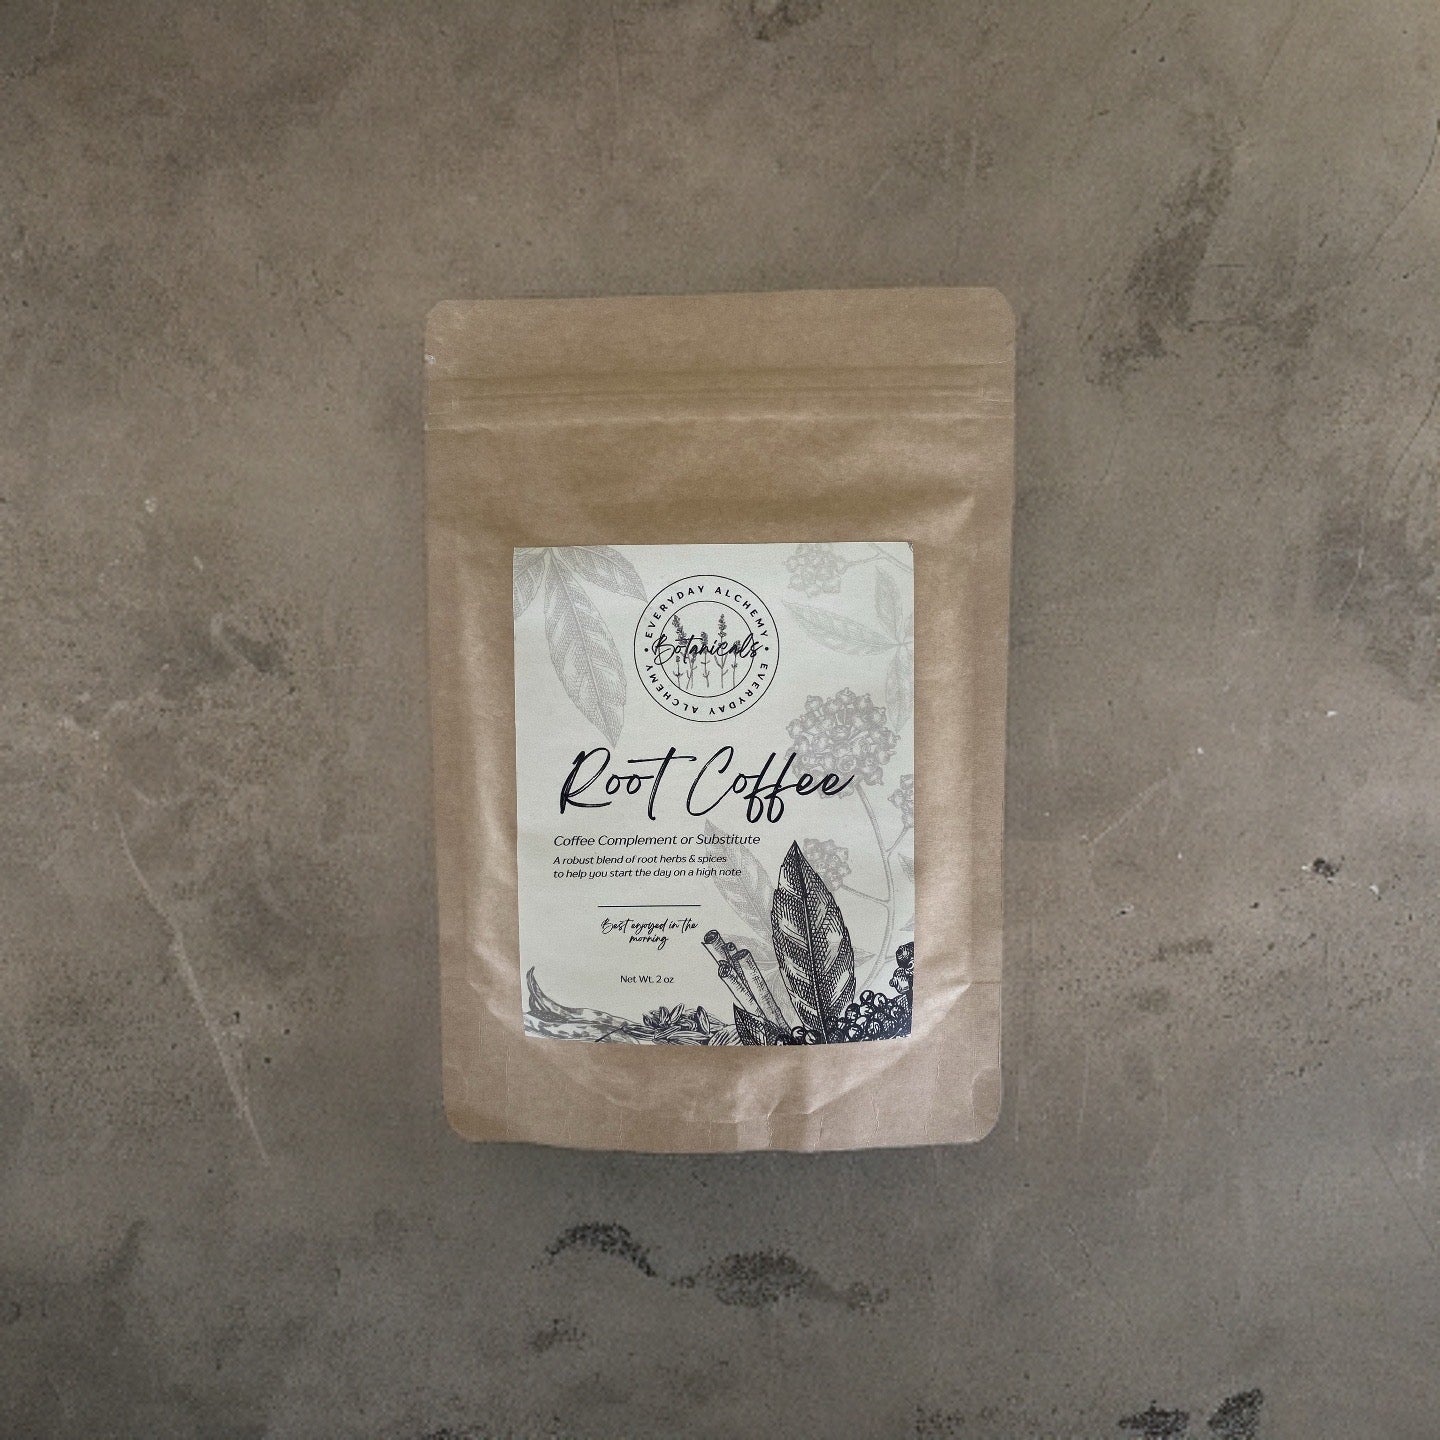 Root Coffee: Caffeine Free Coffee Substitute